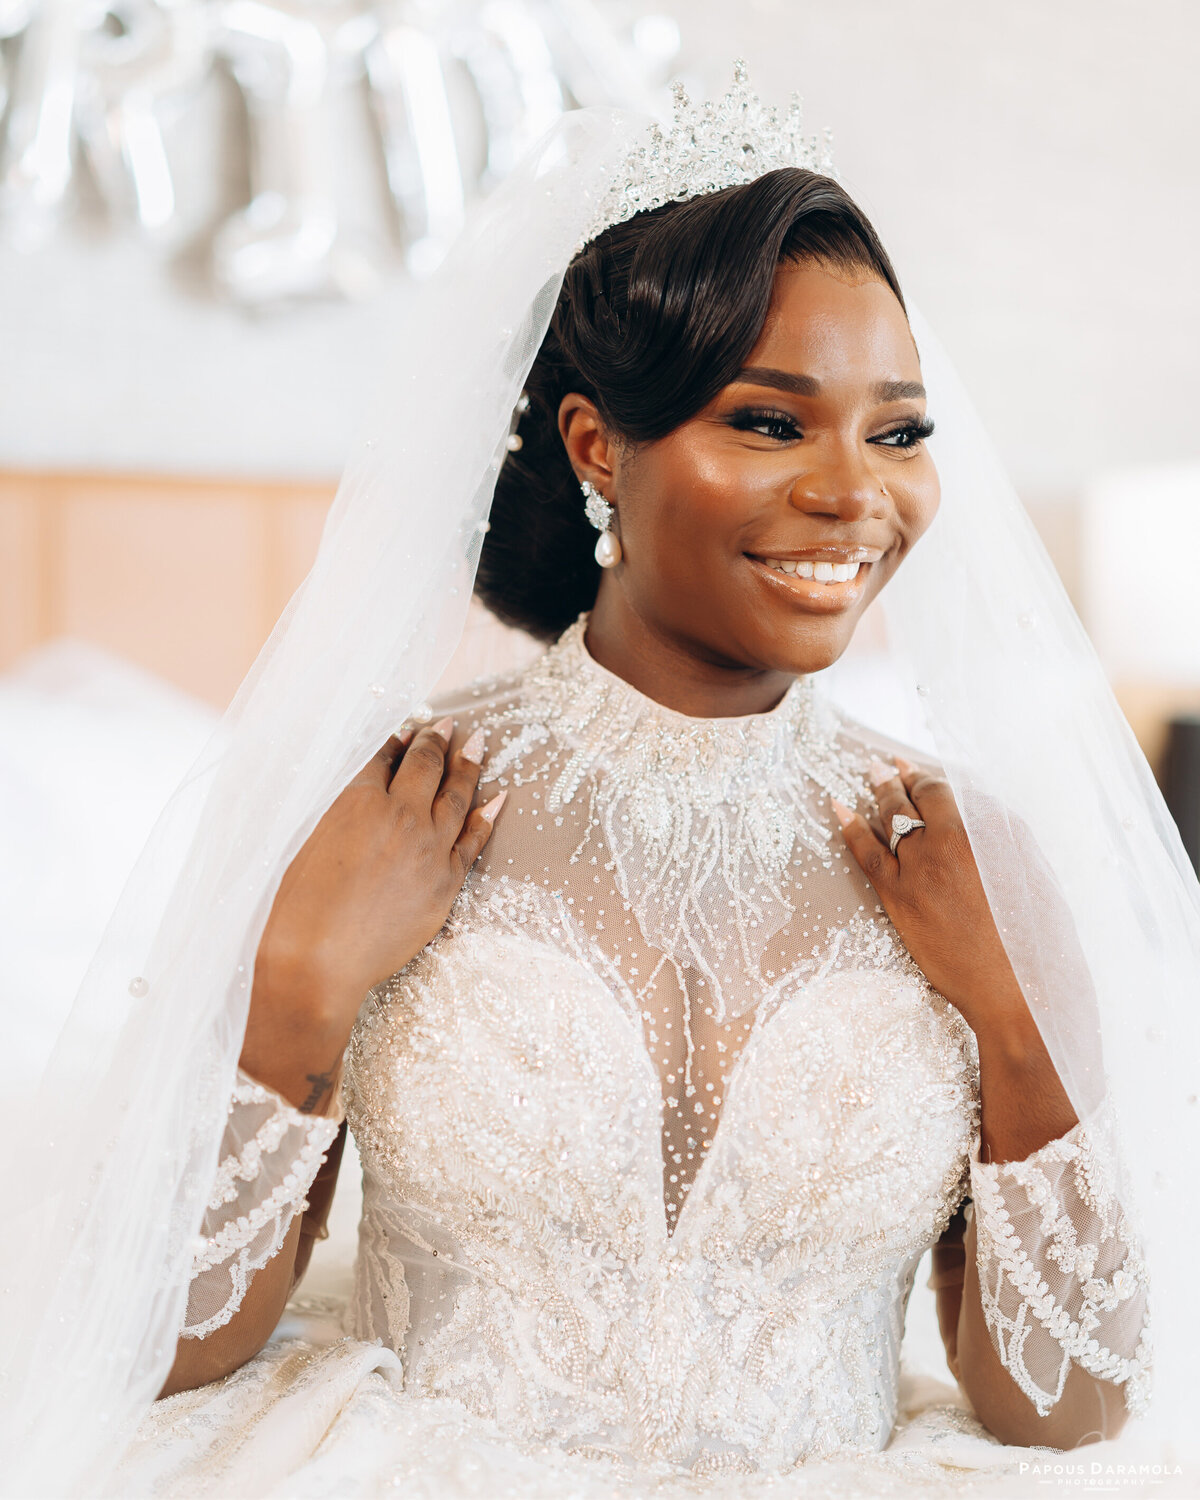 Abigail and Abije Oruka Events Papouse photographer Wedding event planners Toronto planner African Nigerian Eyitayo Dada Dara Ayoola outdoor ceremony floral princess ballgown rolls royce groom suit potraits  paradise banquet hall vaughn 90